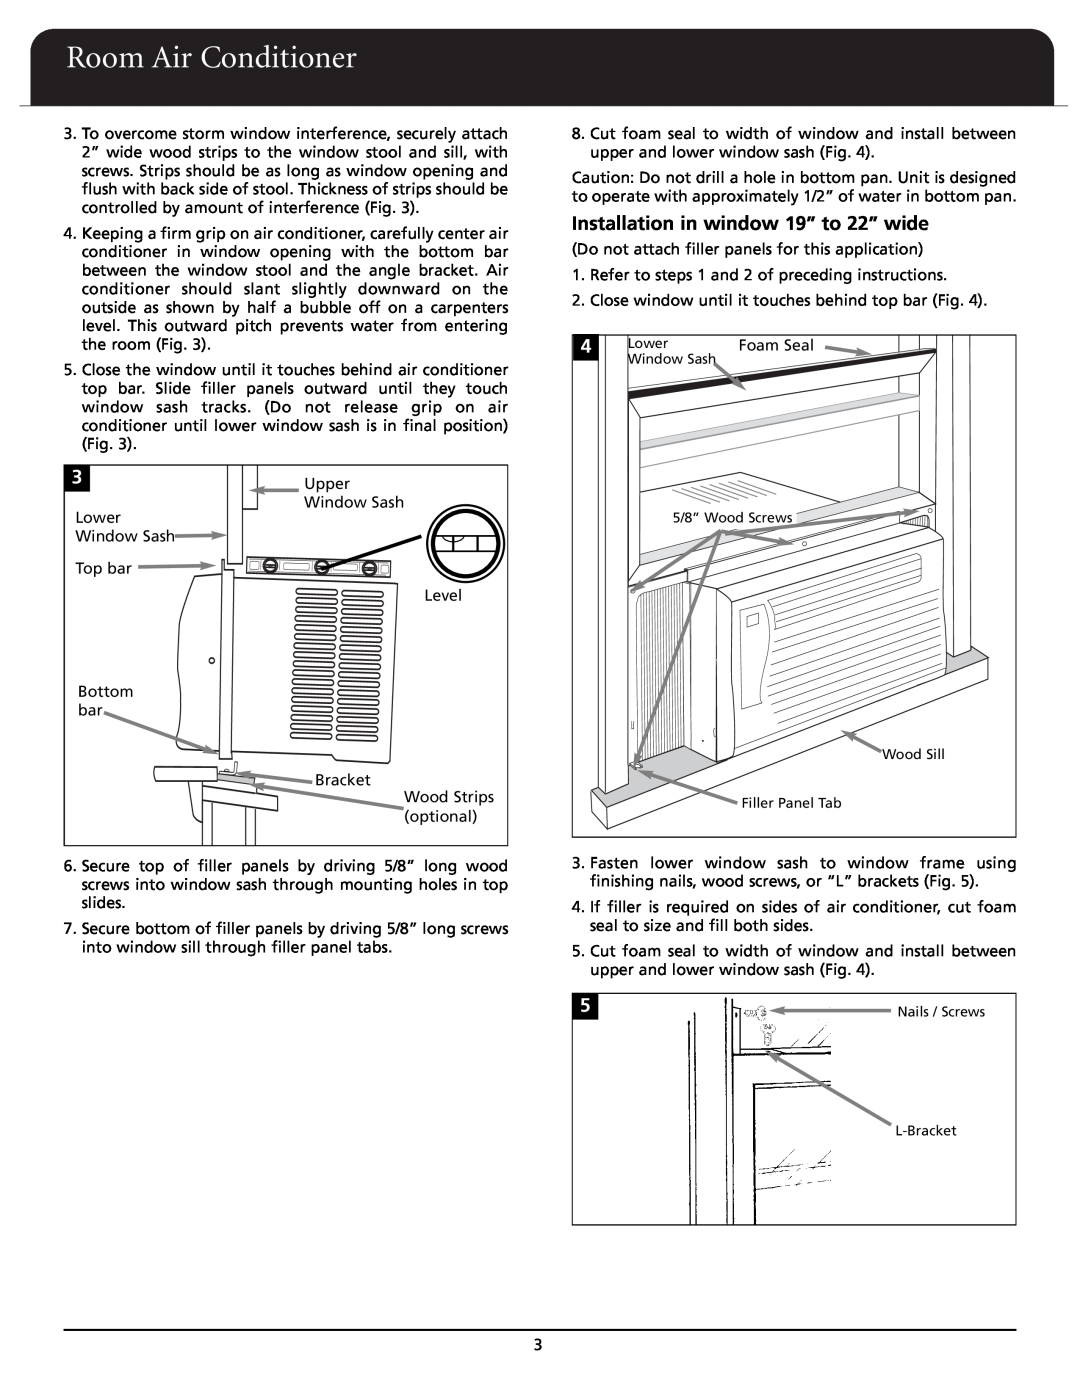 Fedders A6X05F2D important safety instructions Installation in window 19” to 22” wide, Room Air Conditioner 